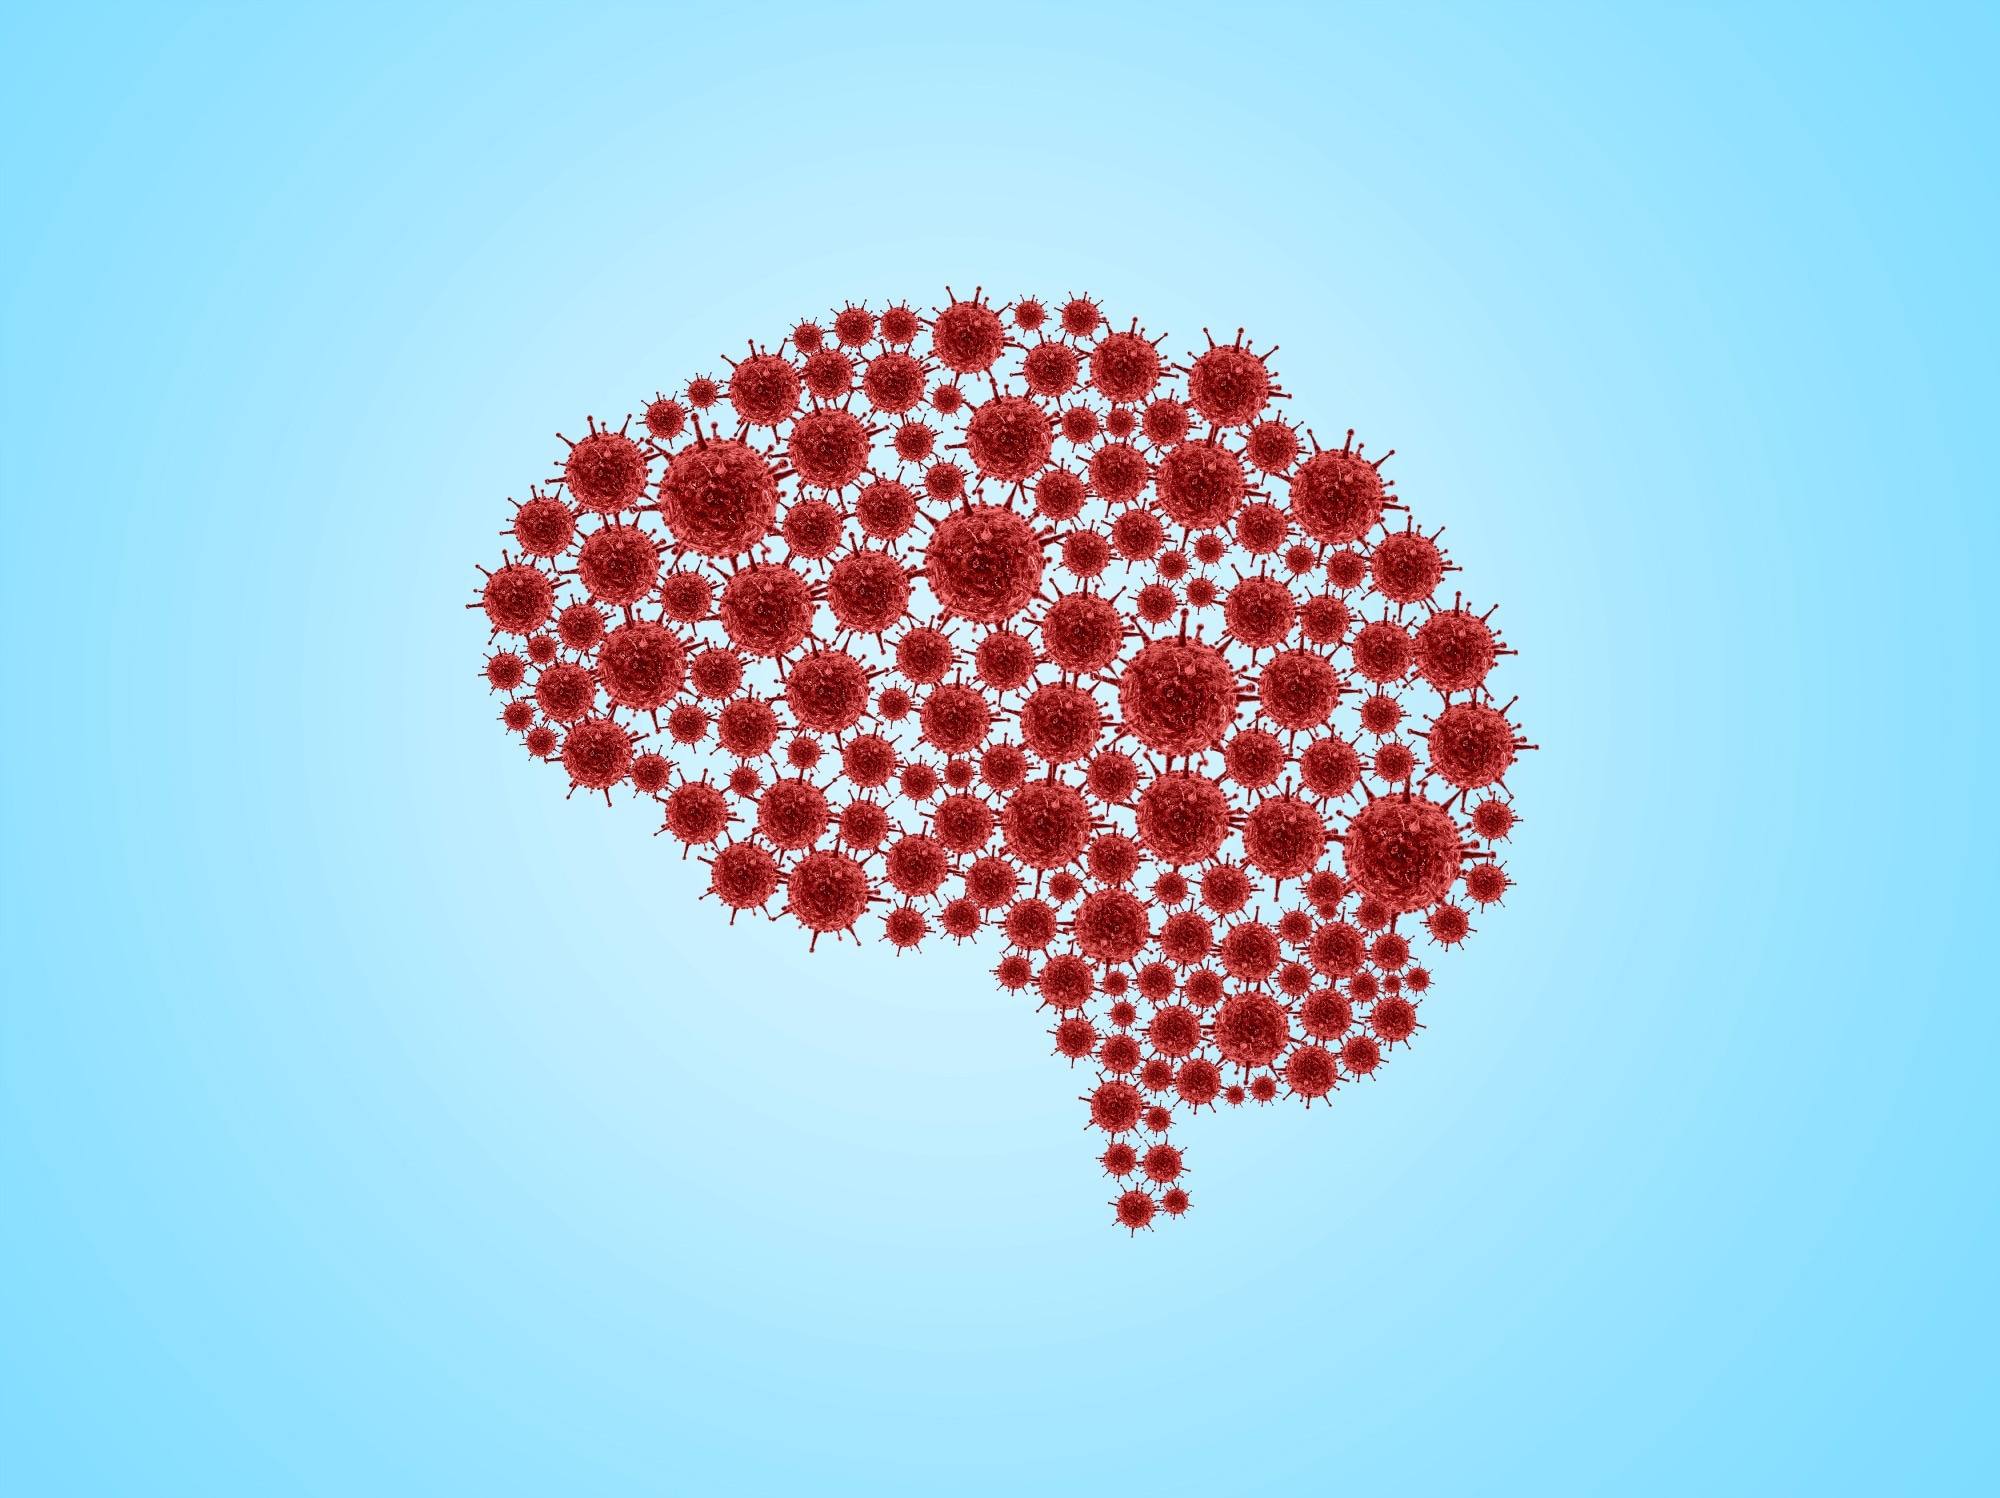 Study: Cognitive function in non-hospitalized patients 8–13 months after acute COVID-19 infection: A cohort study in Norway. Image Credit: DOERS / Shutterstock